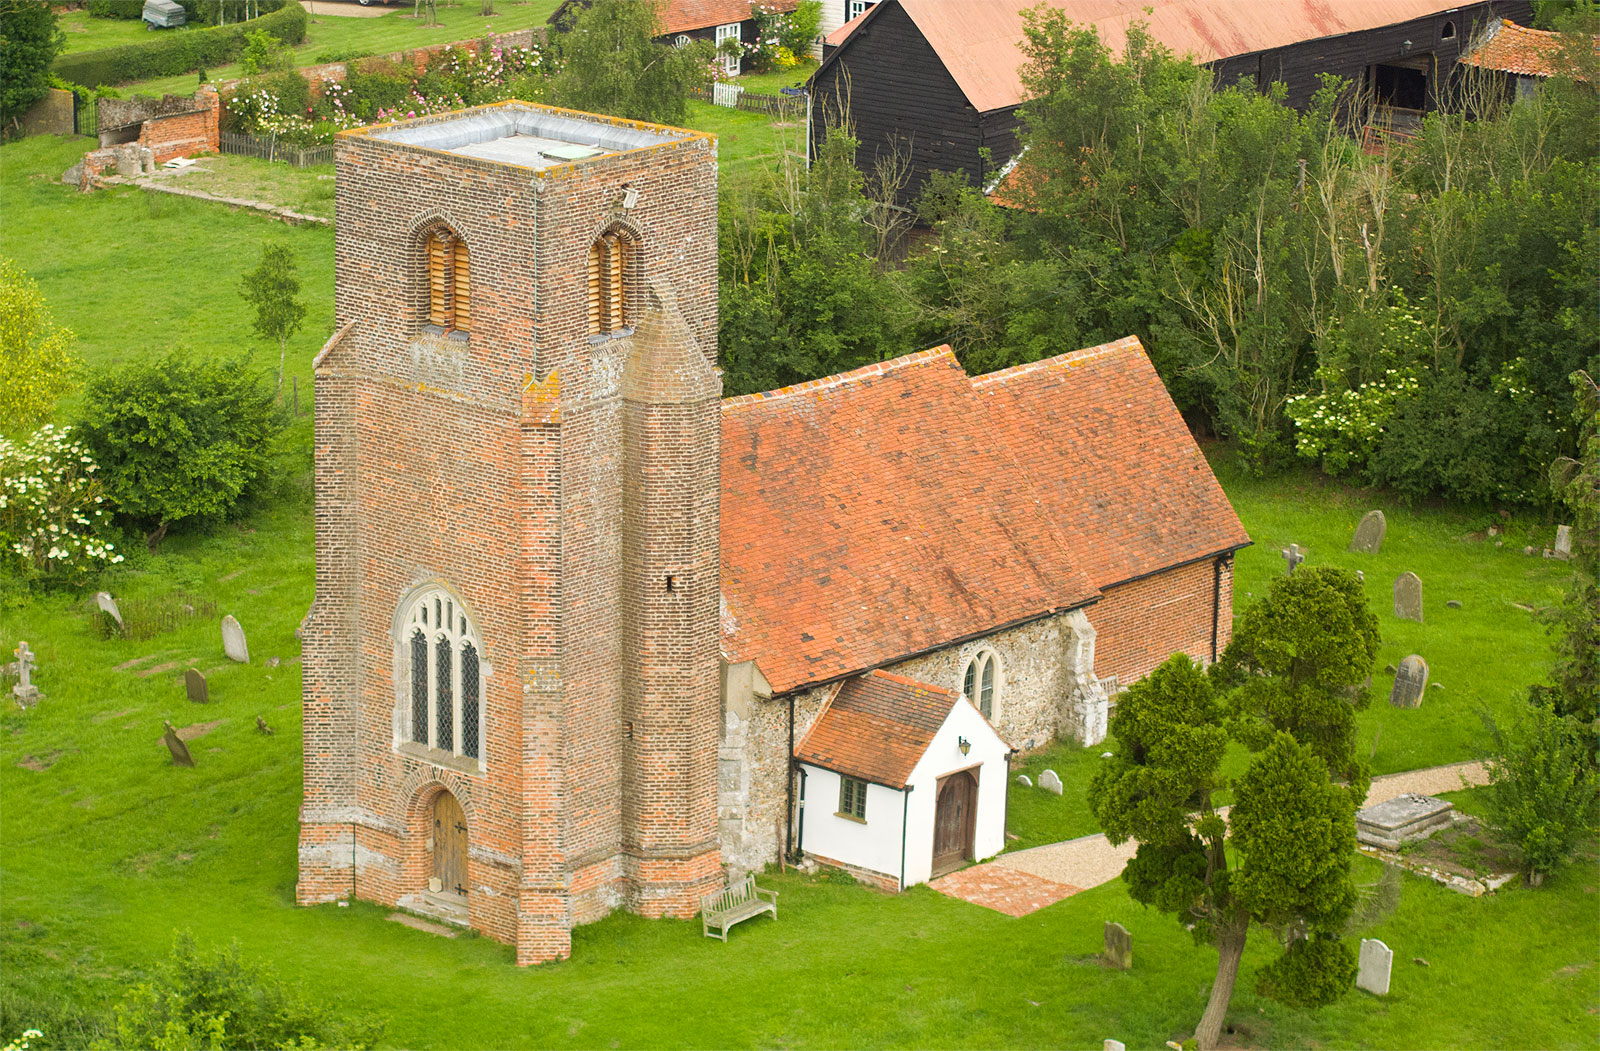 Aerial photograph of historic church in Essex showing the whole structure